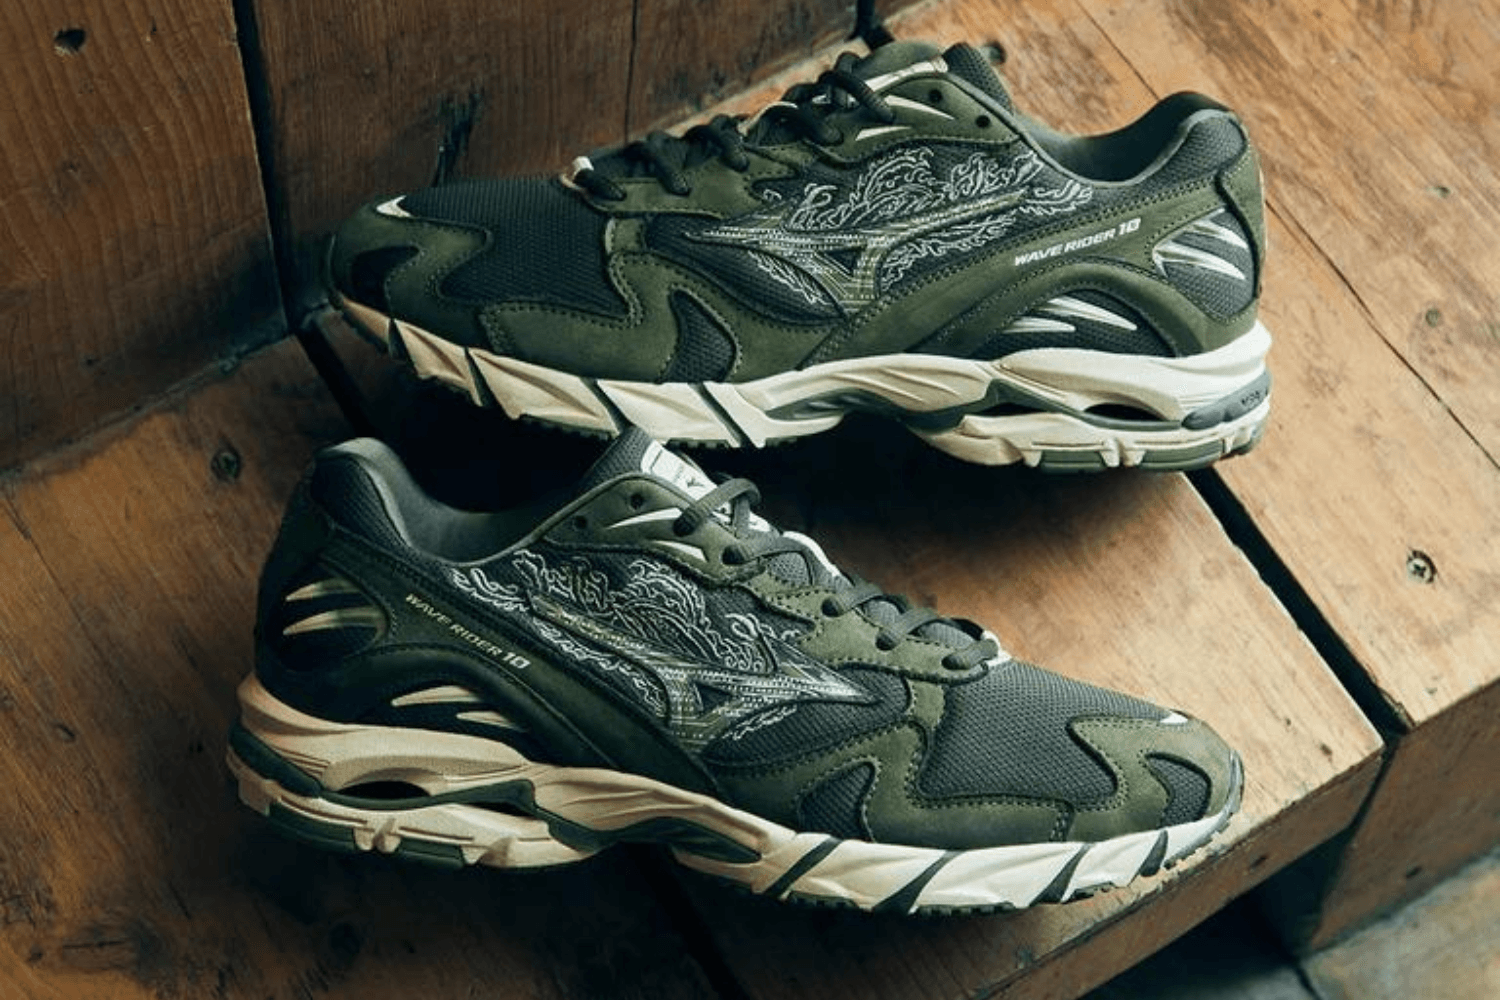 Know your size: Mizuno sizing guide